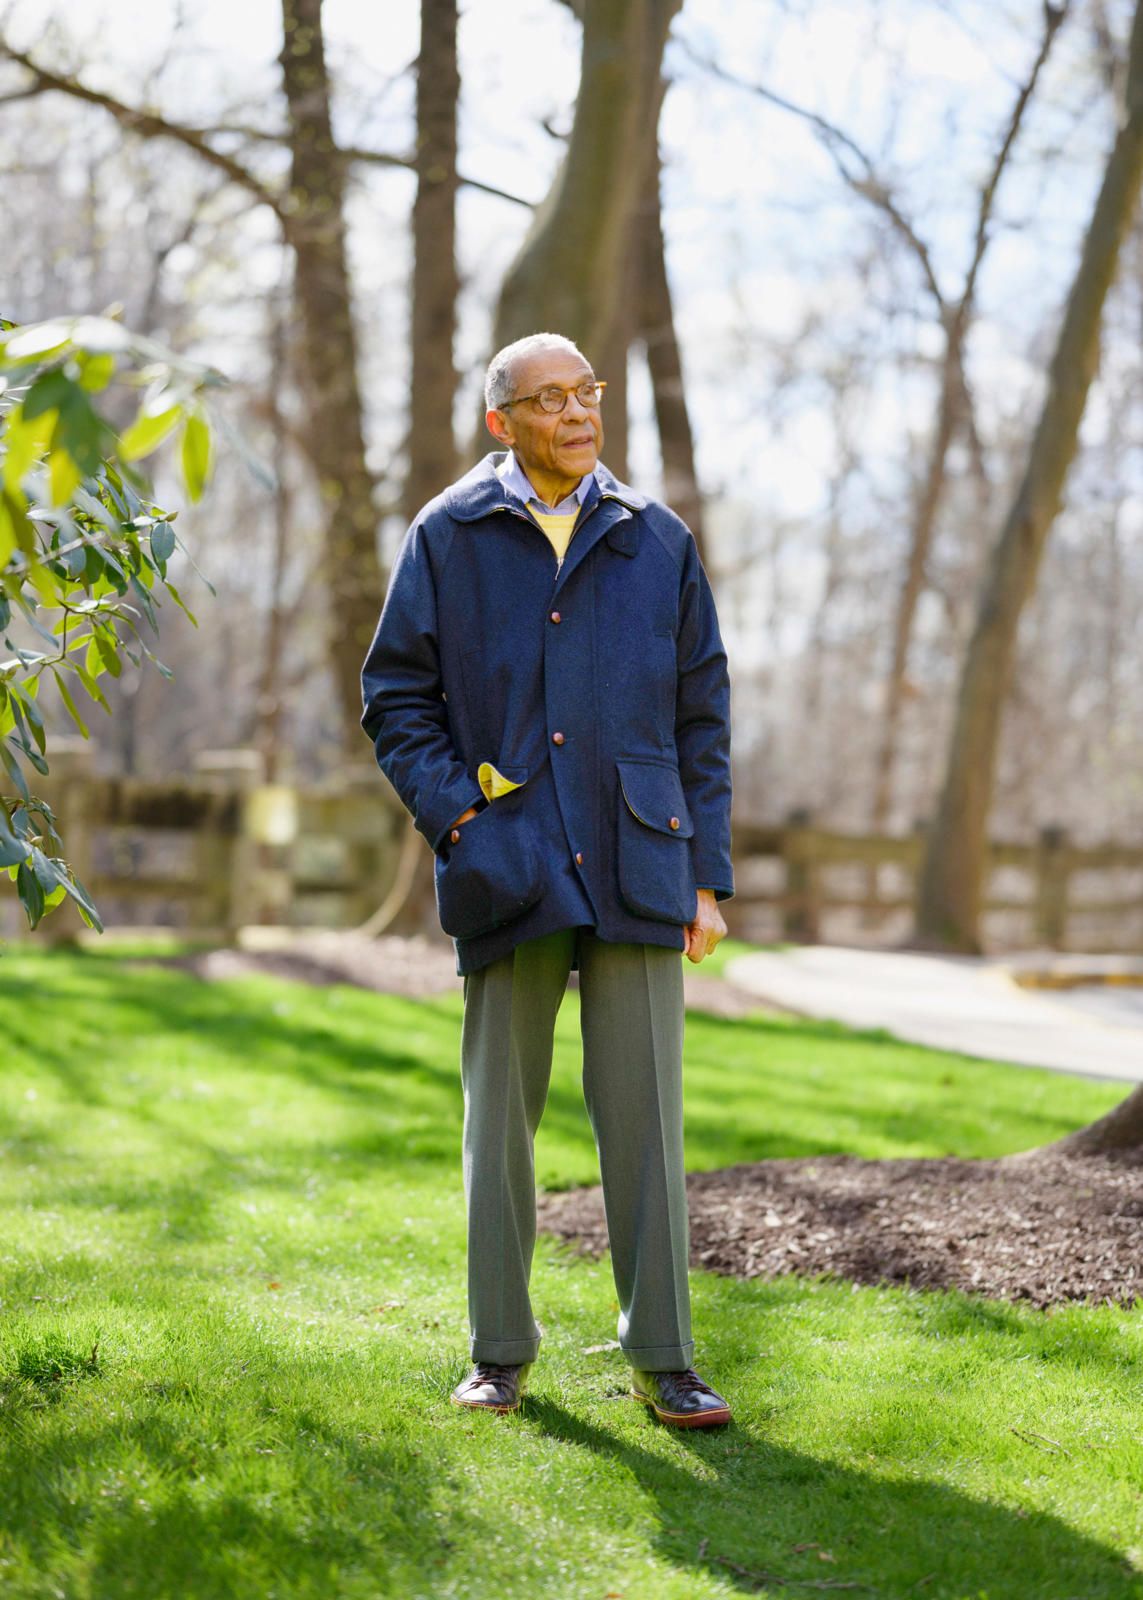 skip grant stands near his home in chevy chase, maryland on april 2, 2021